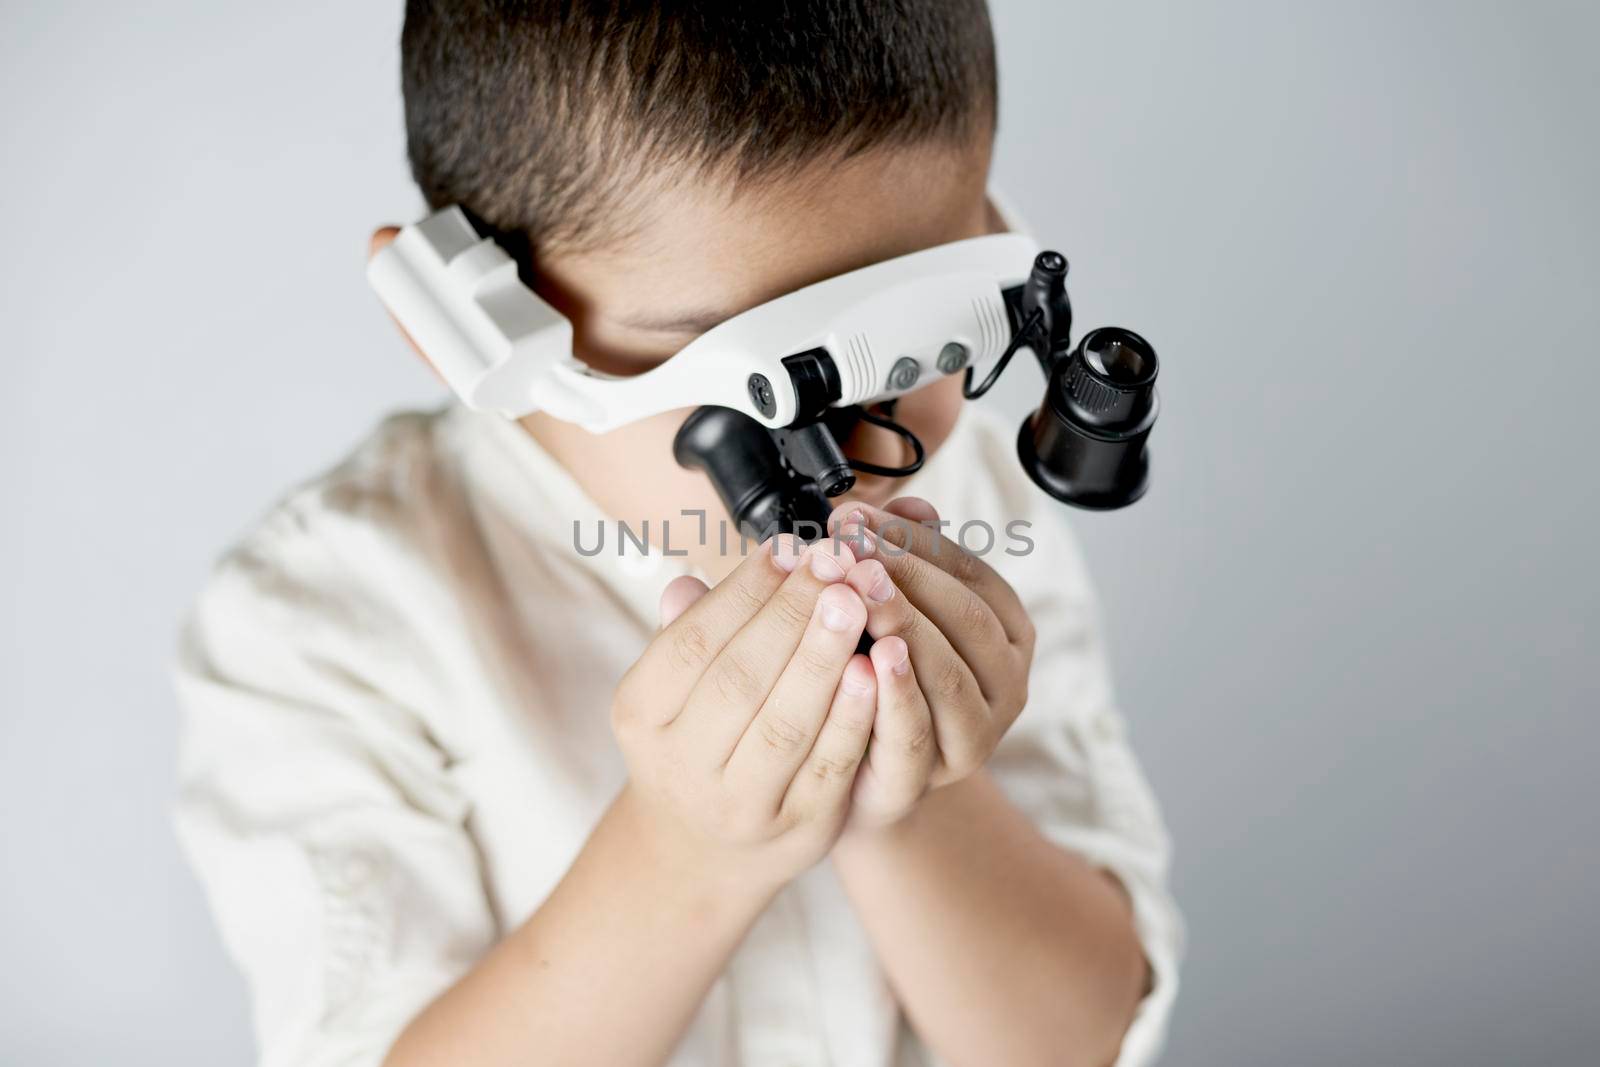 Schoolboy equipped with headband magnifying glass conducting scientific experiments at the workshop